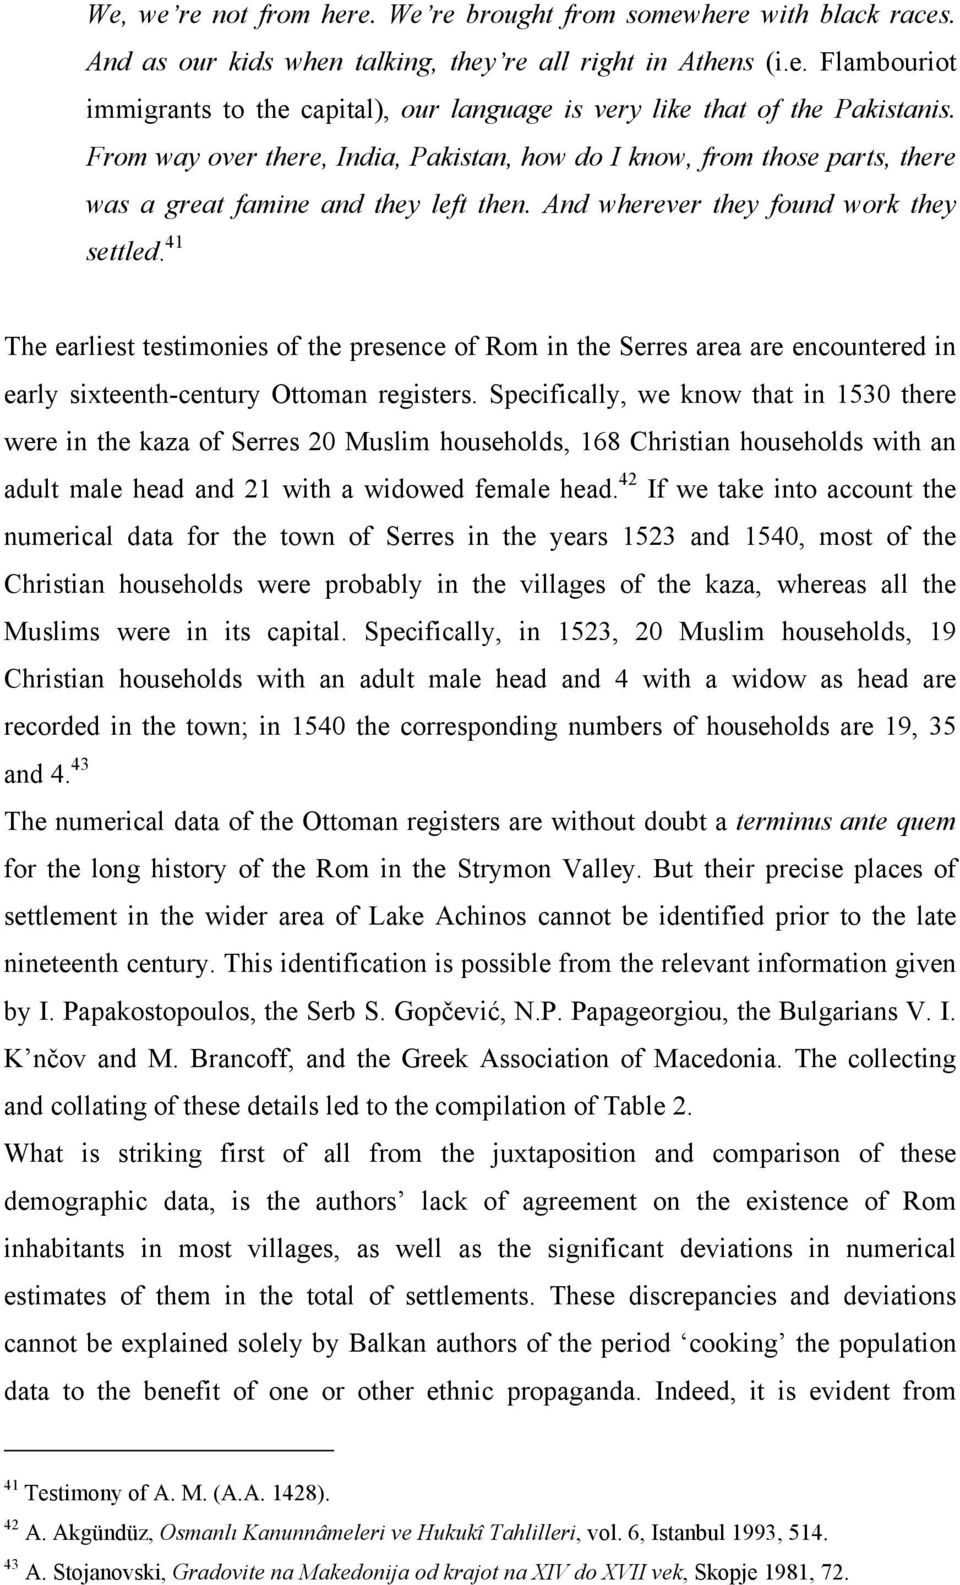 41 The earliest testimonies of the presence of Rom in the Serres area are encountered in early sixteenth-century Ottoman registers.